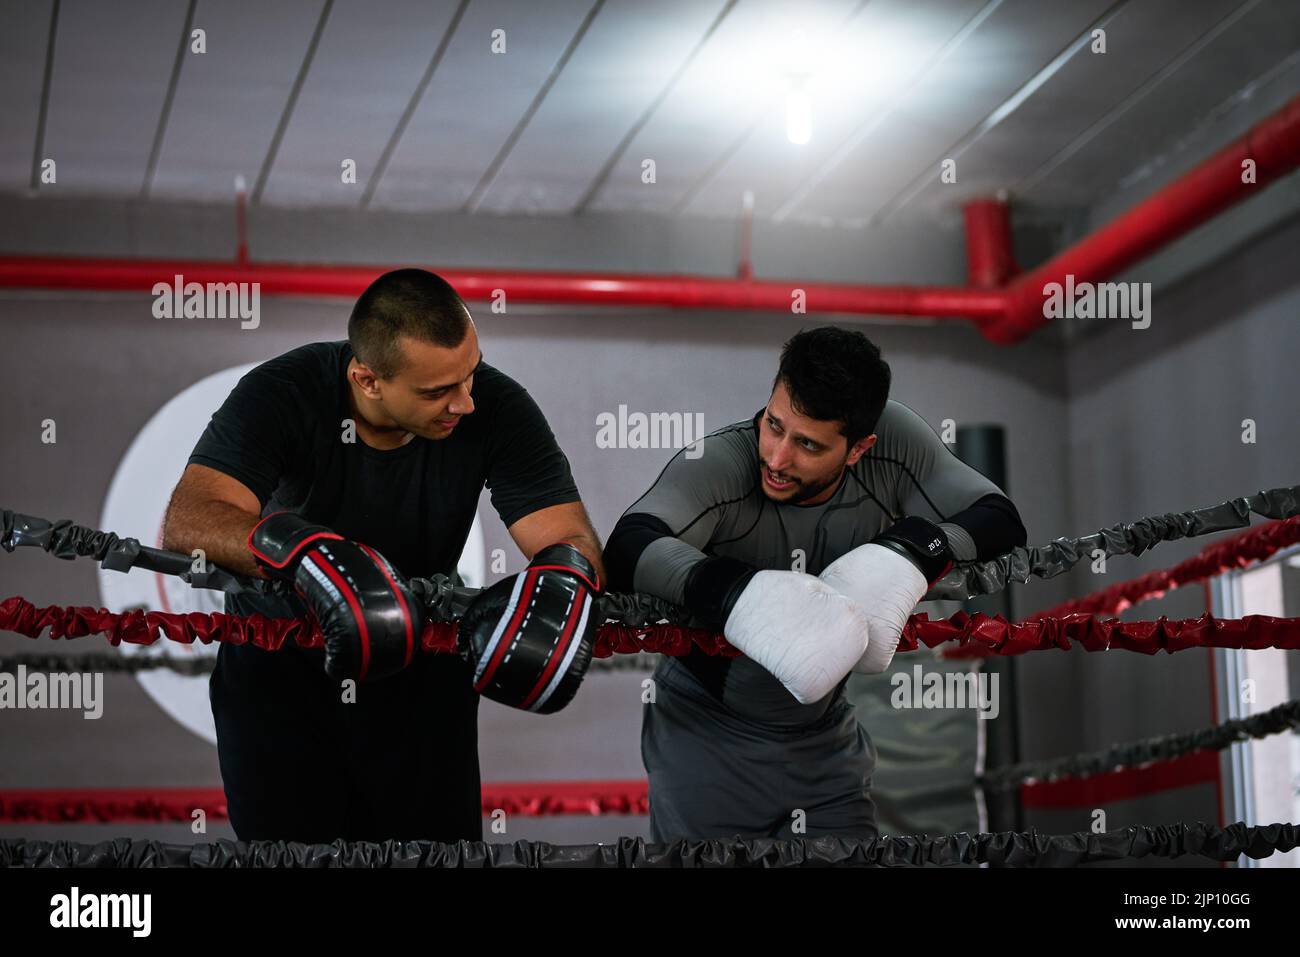 That was a good session. two young male athletes standing in a boxing ring after a sparring session. Stock Photo